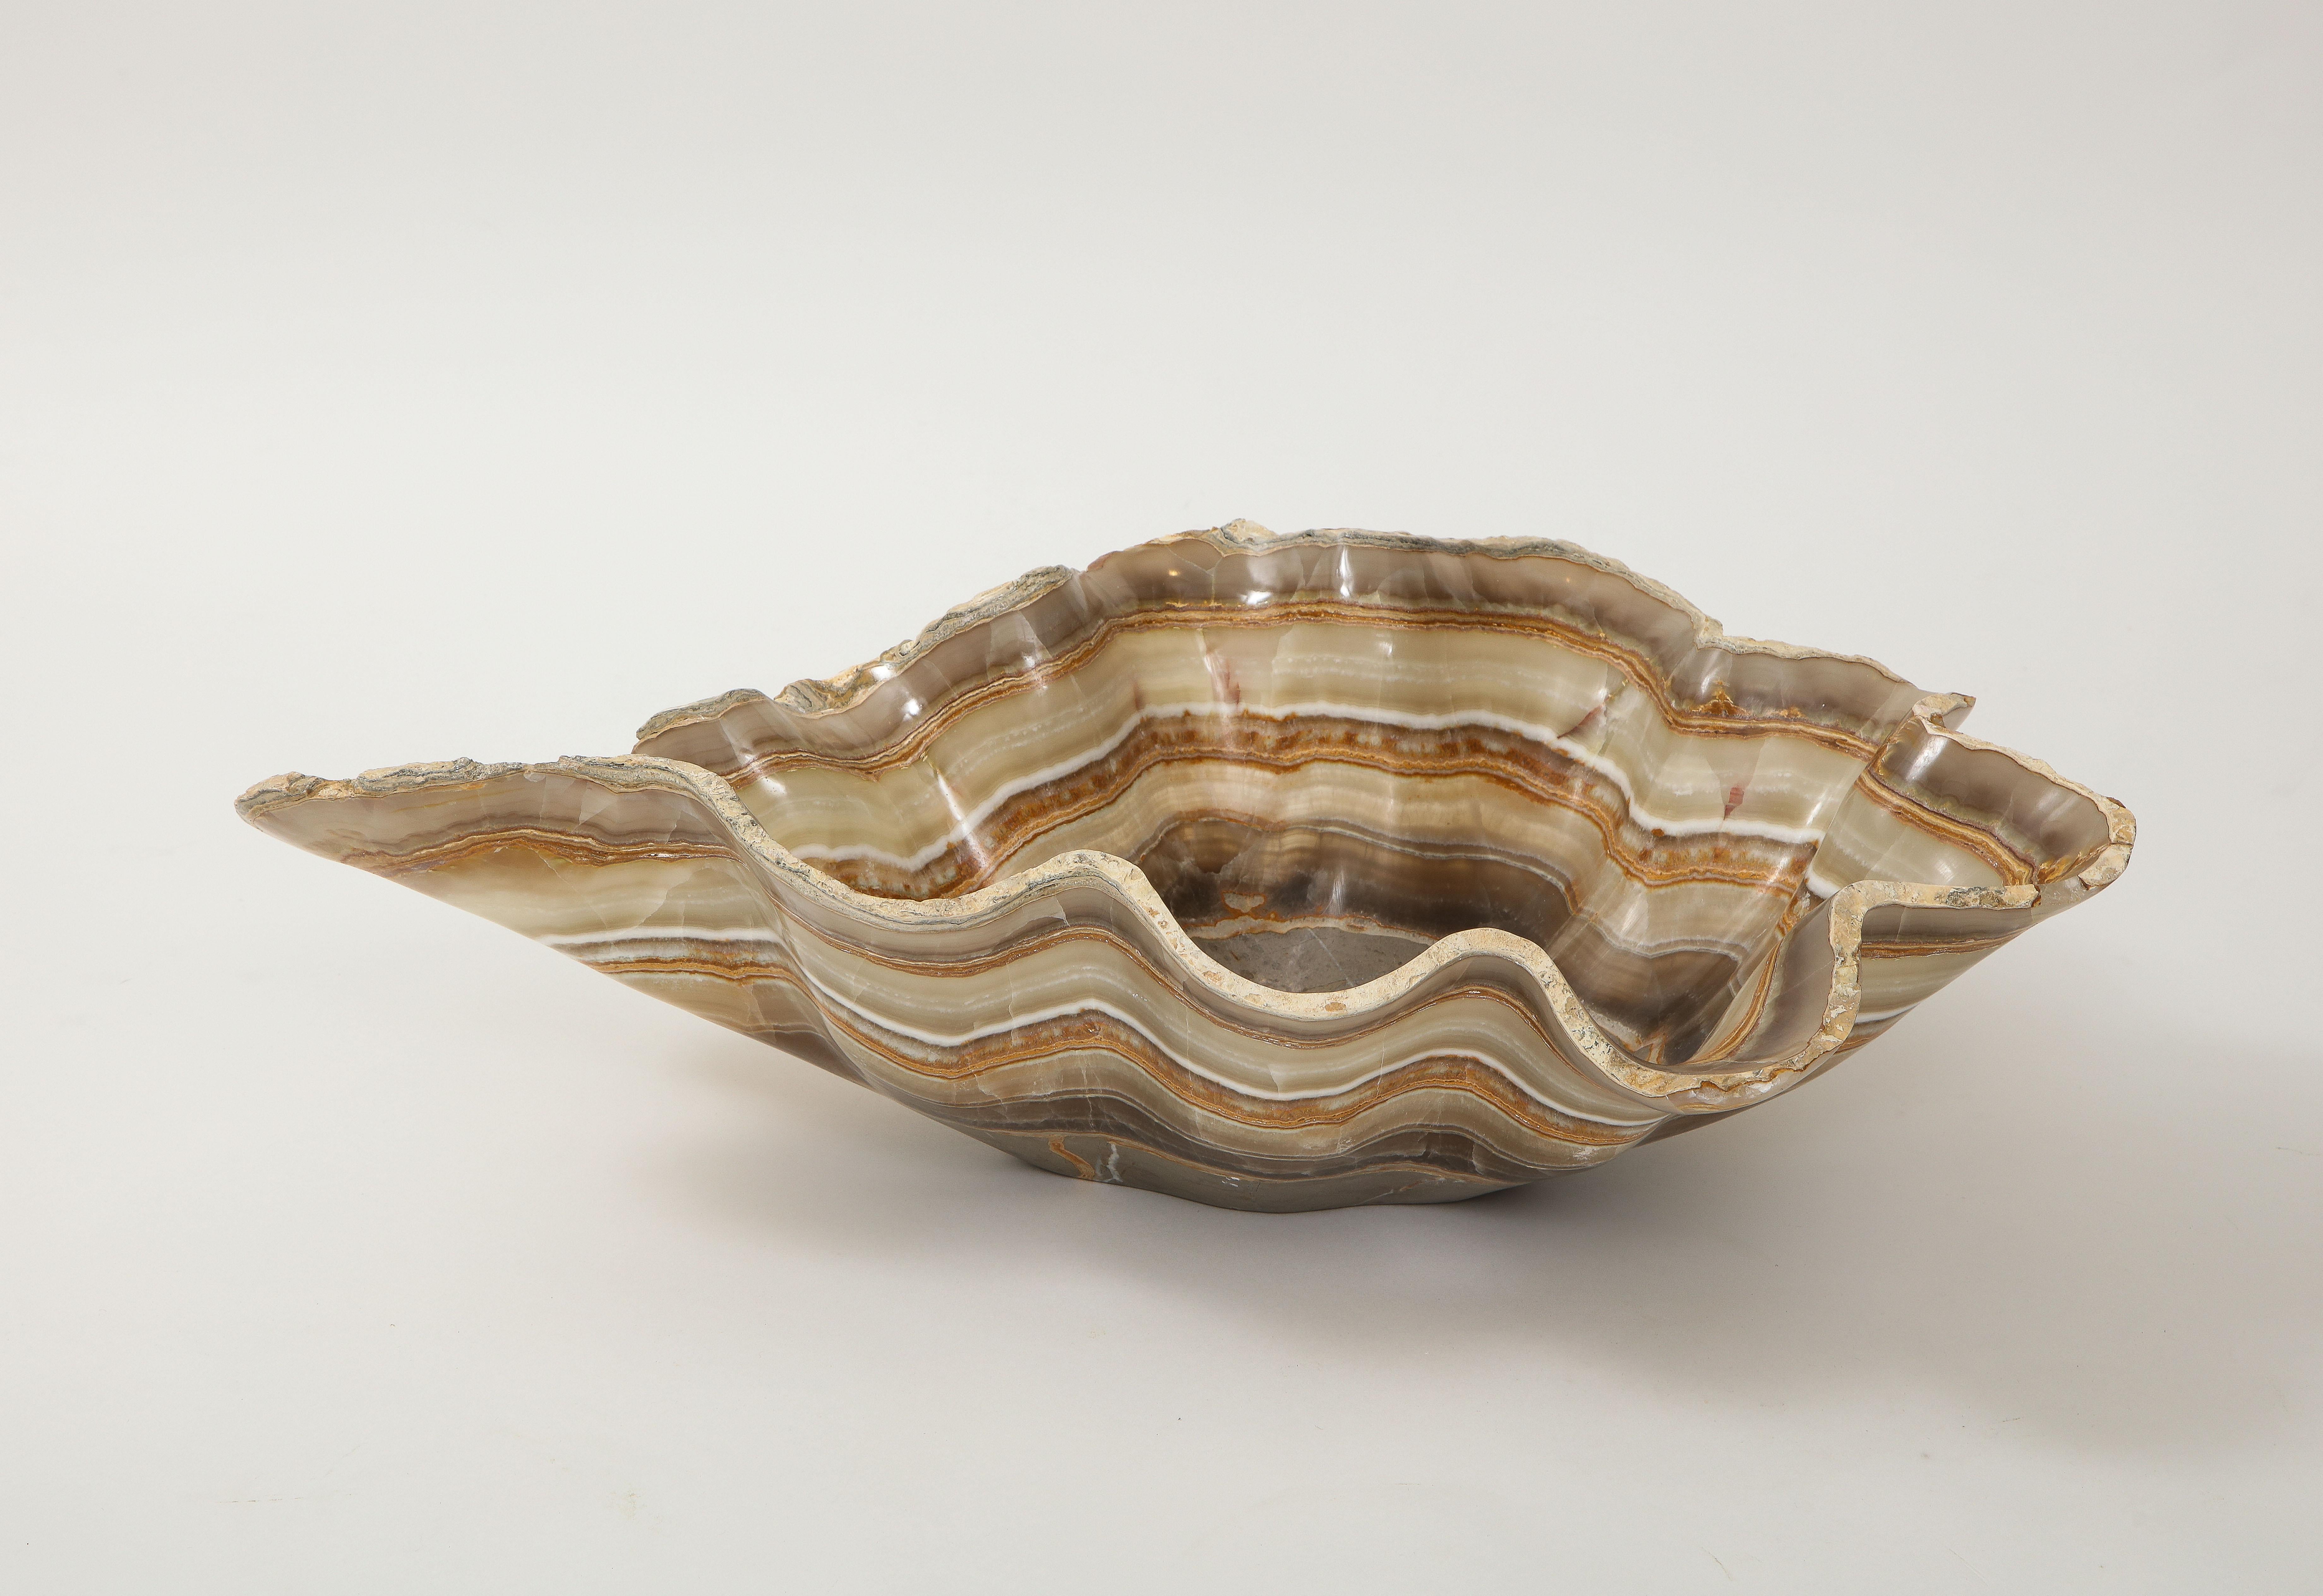 A hand carved raw edge onyx bowl or centerpiece in an impressive size with a live scalloped edge banded with rings rings of taupe, tan, griege, amber, brown and cream. Utilitarian and stunning, this centerpiece works with a variety of styles